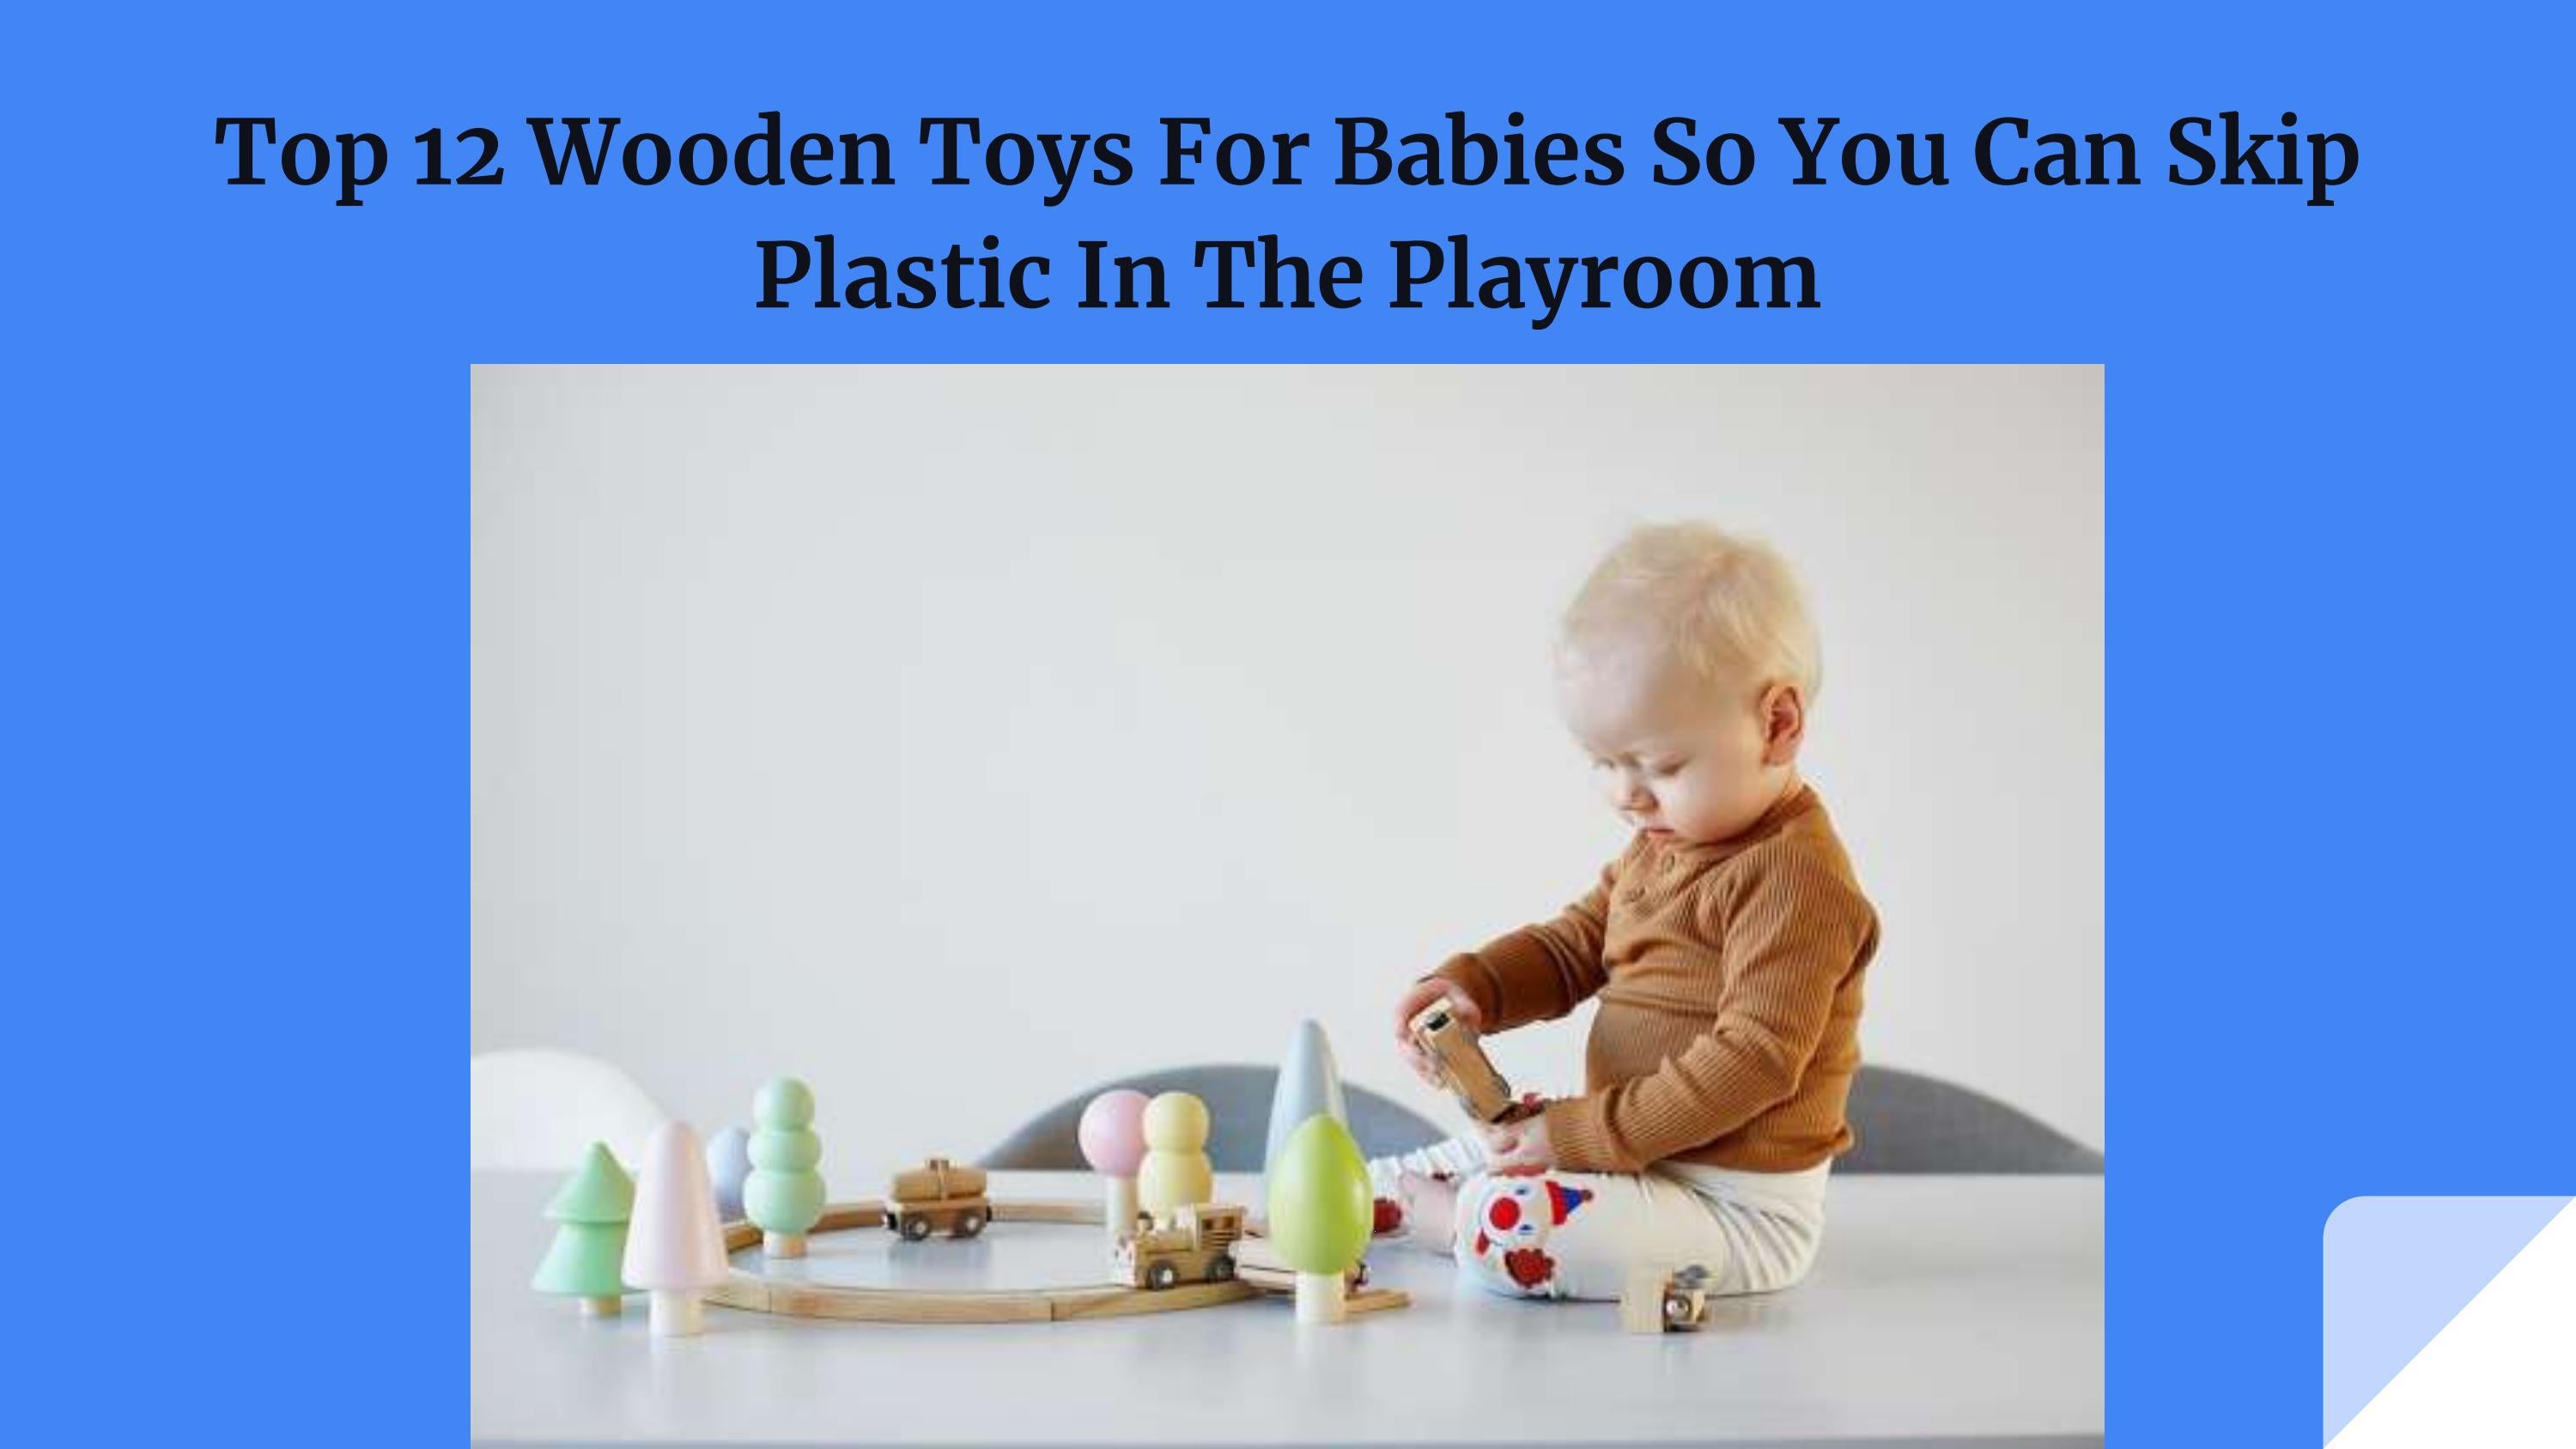 Top 12 Wooden Toys For Babies